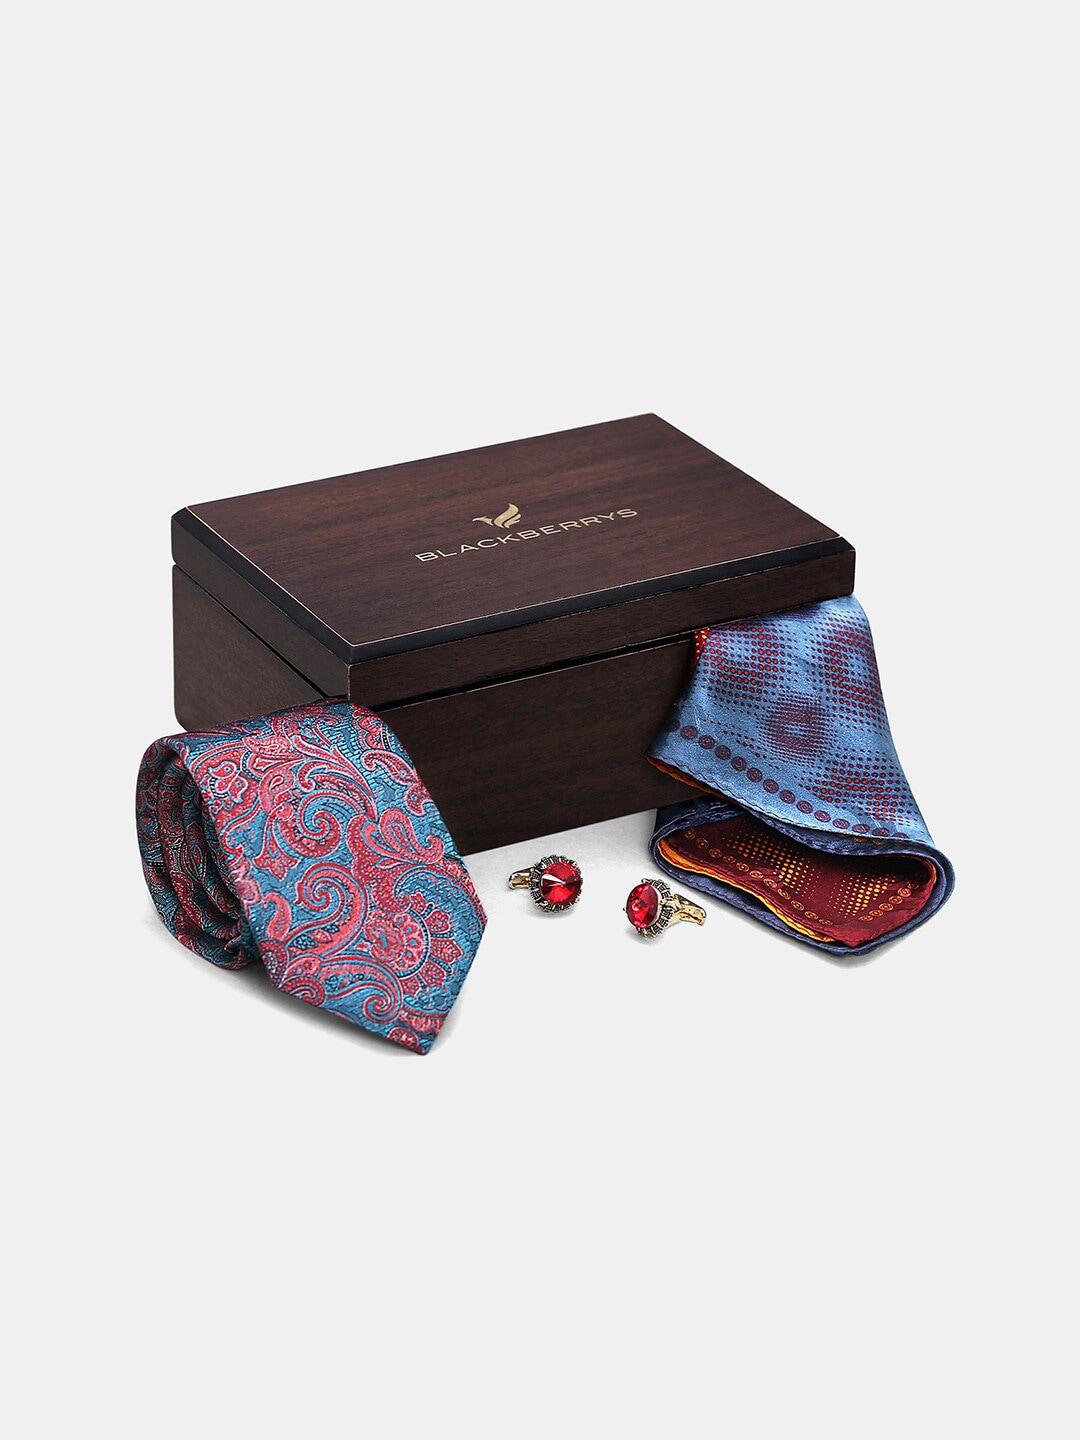 blackberrys-men-printed-silk-tie-with-pocket-square-and-cufflink-formal-accessory-gift-set